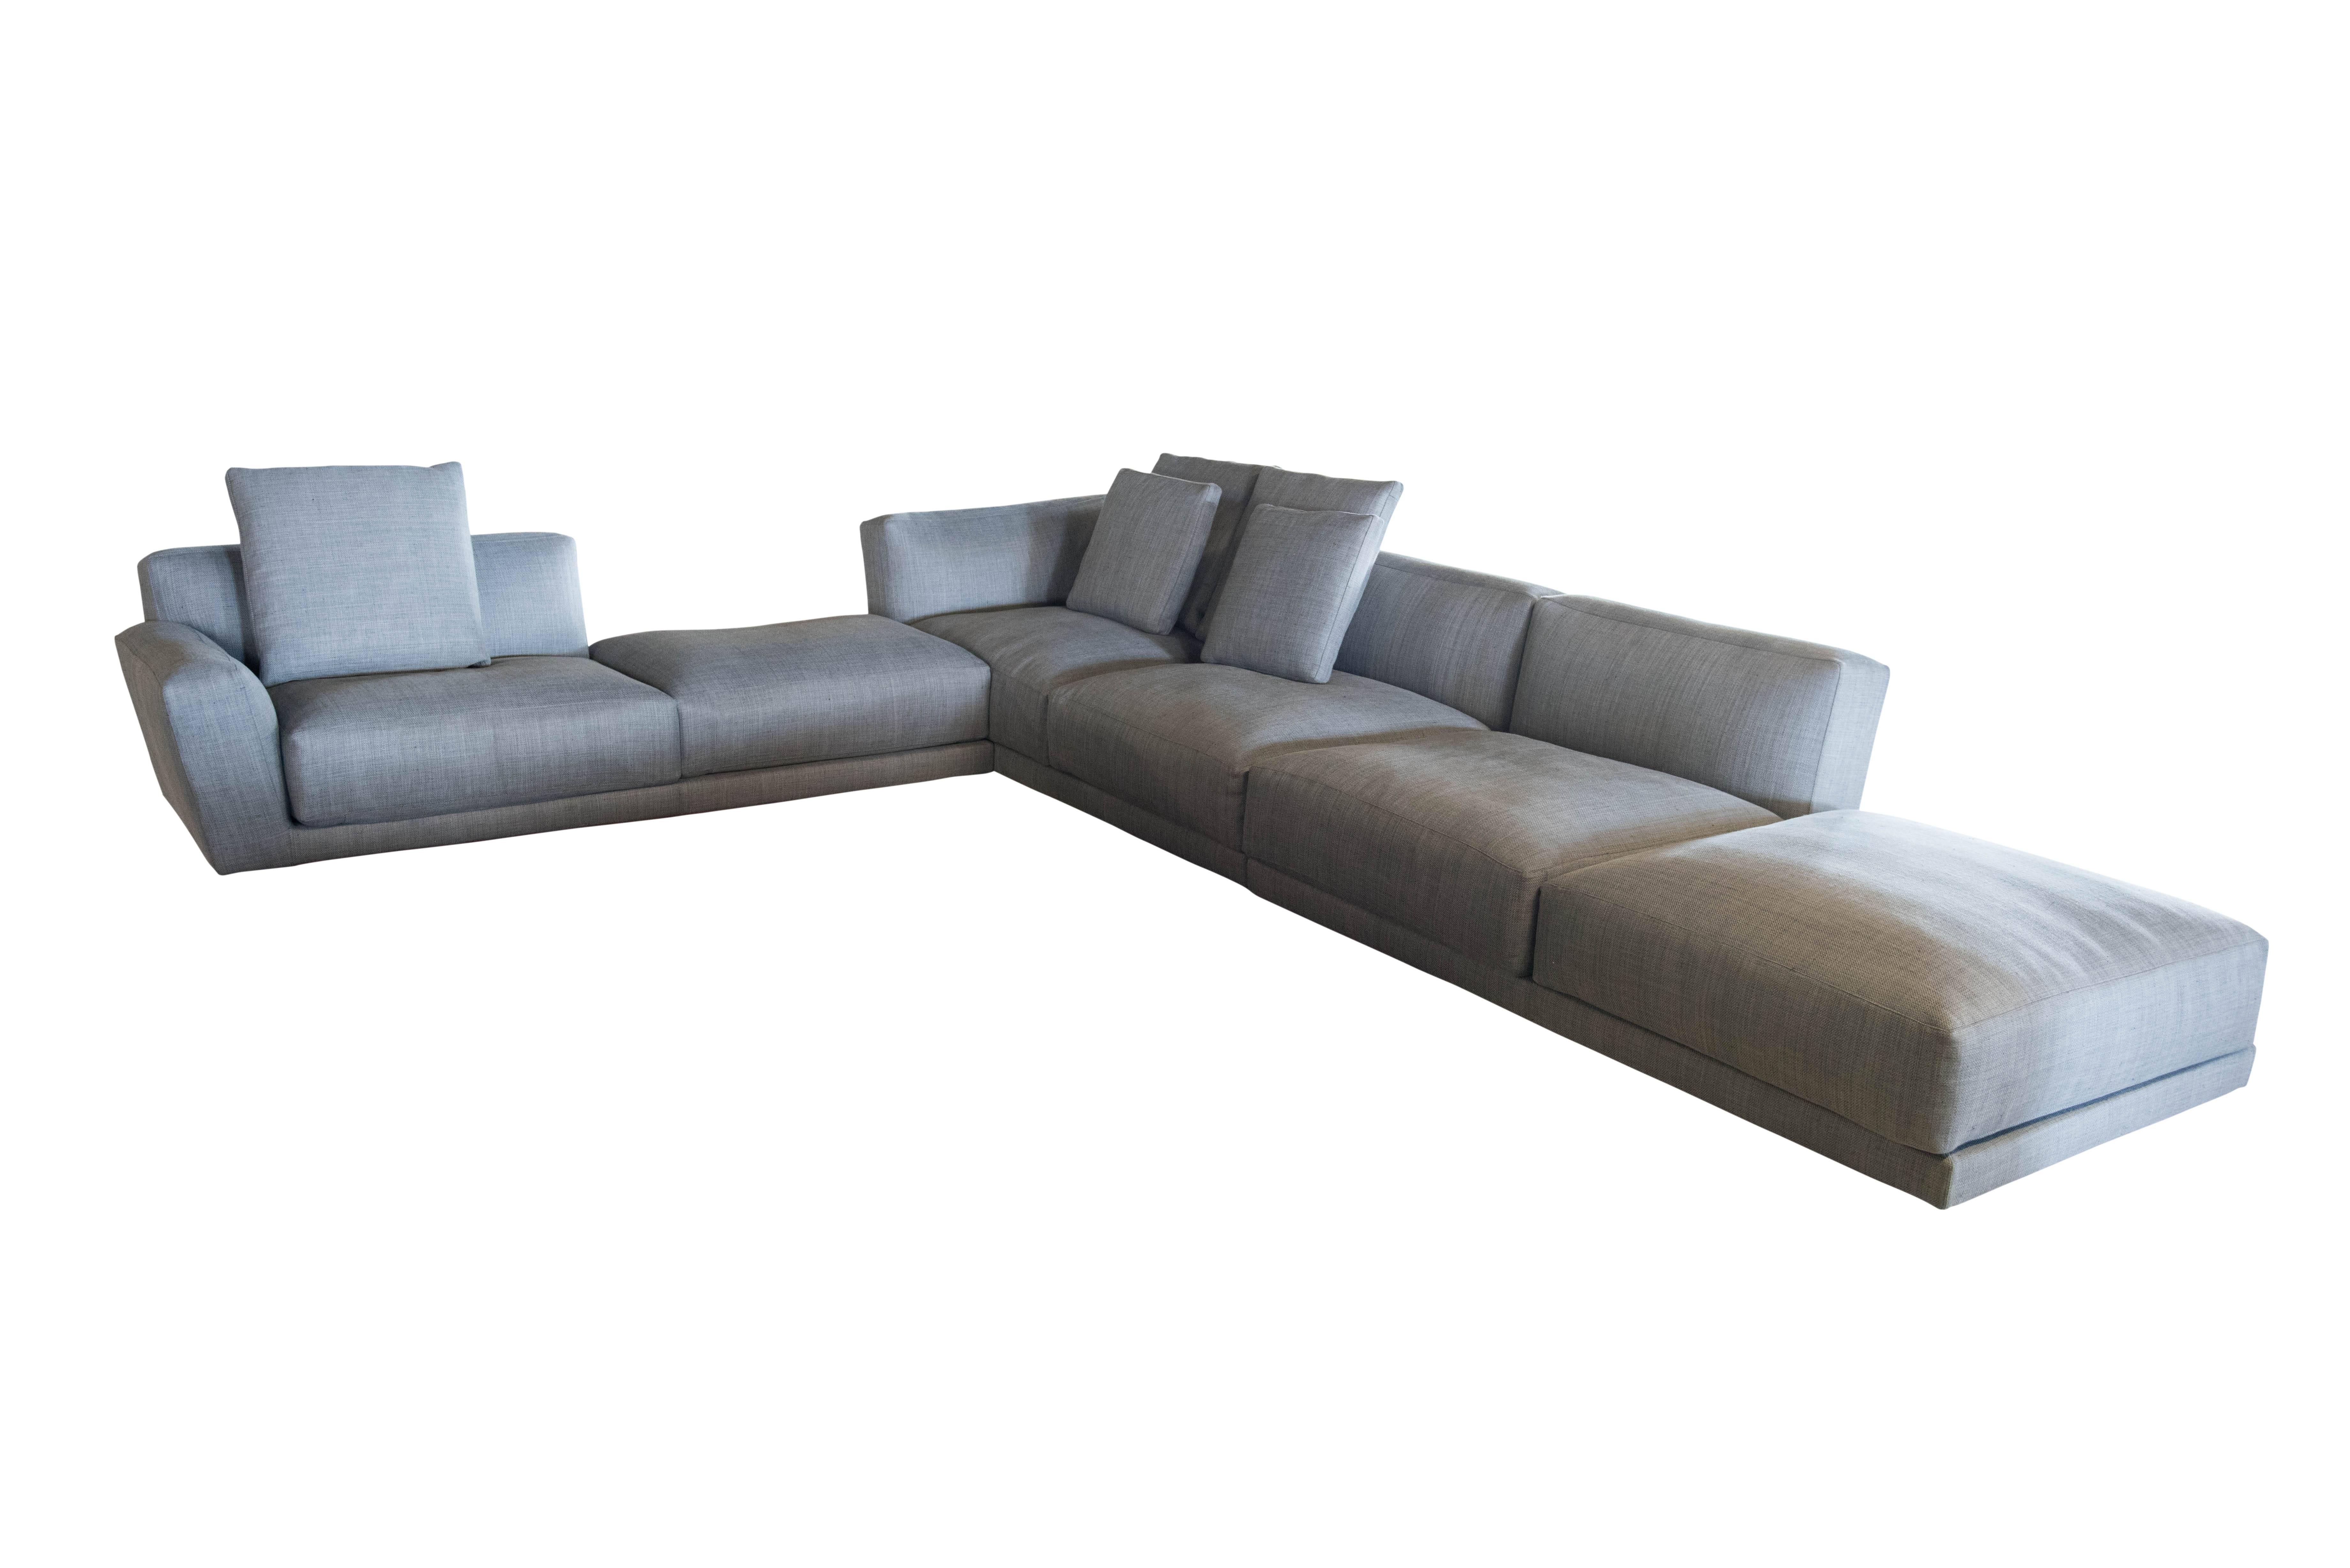 The unusually large cushions, whose softness stretches from the backrest to the armrests, express comfort.  From the world famous B&B Italia comes the Luis Sectional, a contemporary piece that will add a flair of design to any space. 

Technical